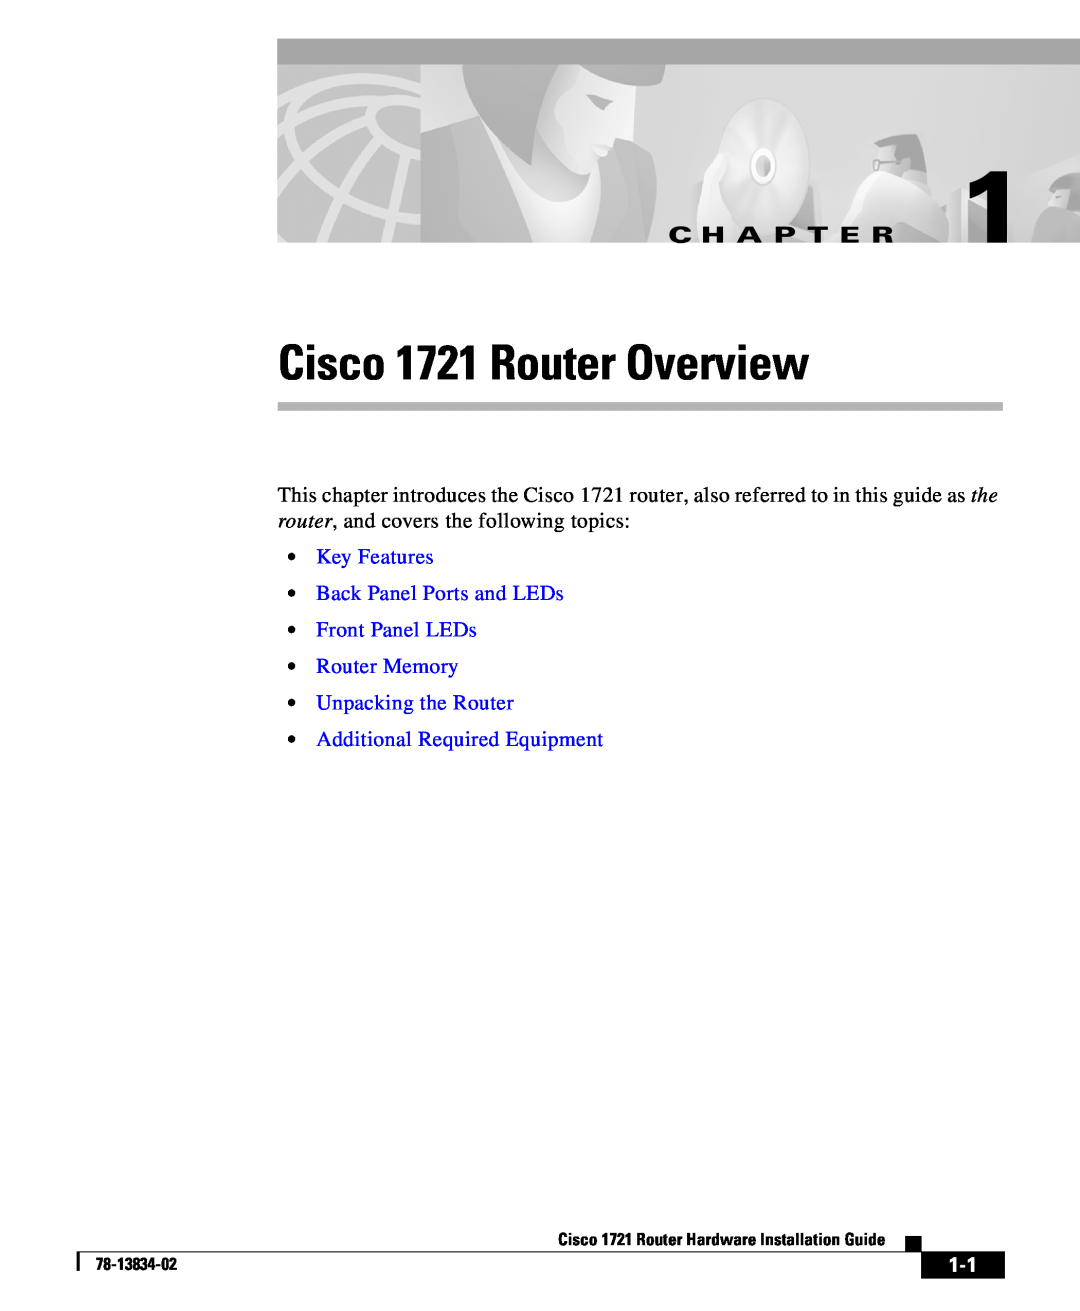 Cisco Systems 1721 manual Key Features Back Panel Ports and LEDs Front Panel LEDs Router Memory, C H A P T E R 